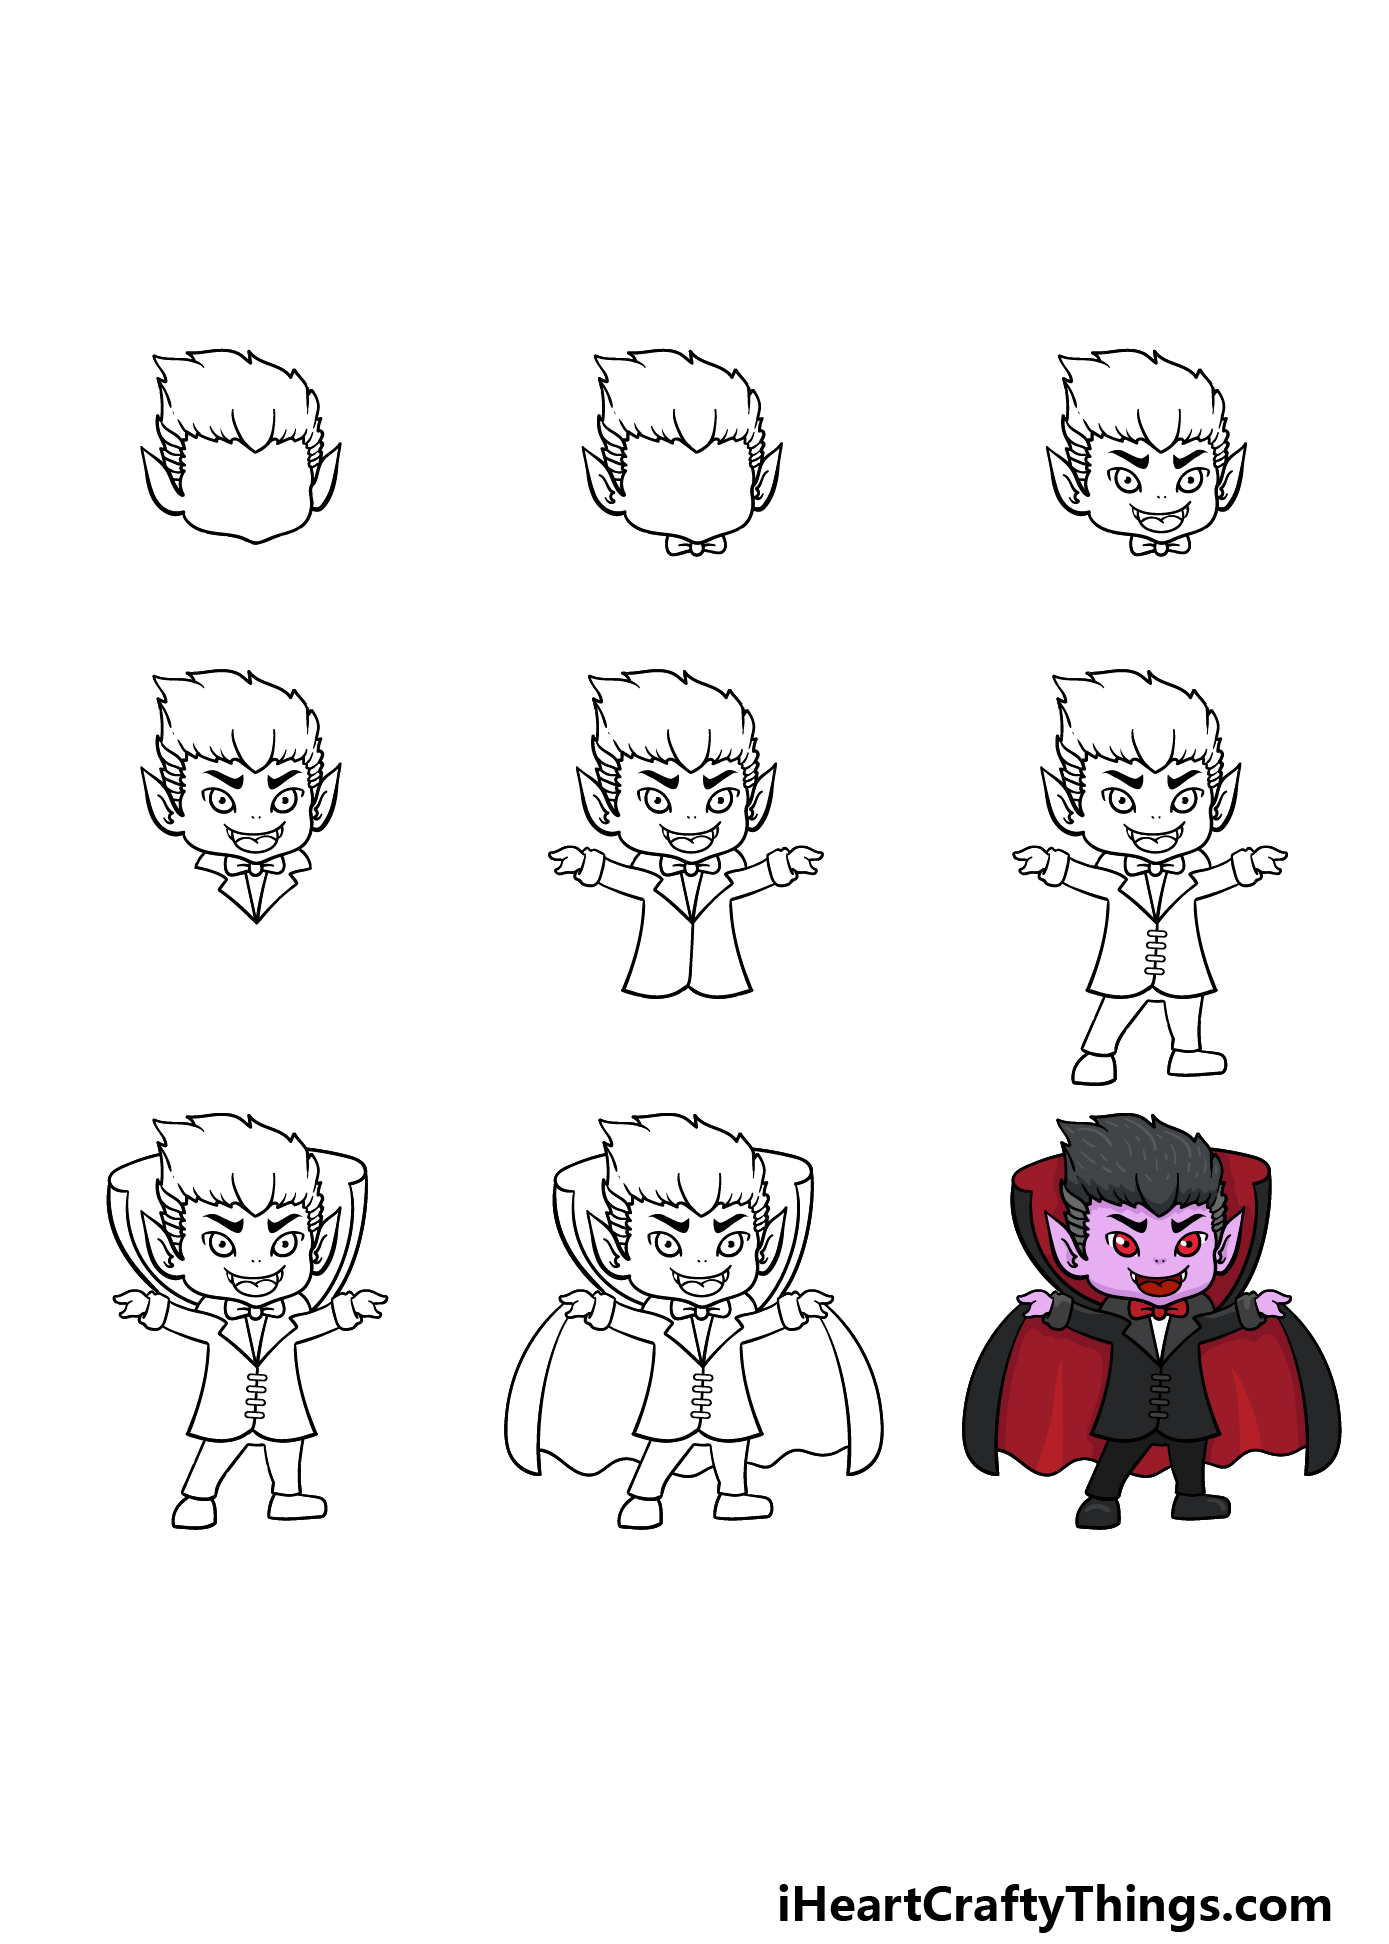 how to draw a cartoon Dracula in 9 steps